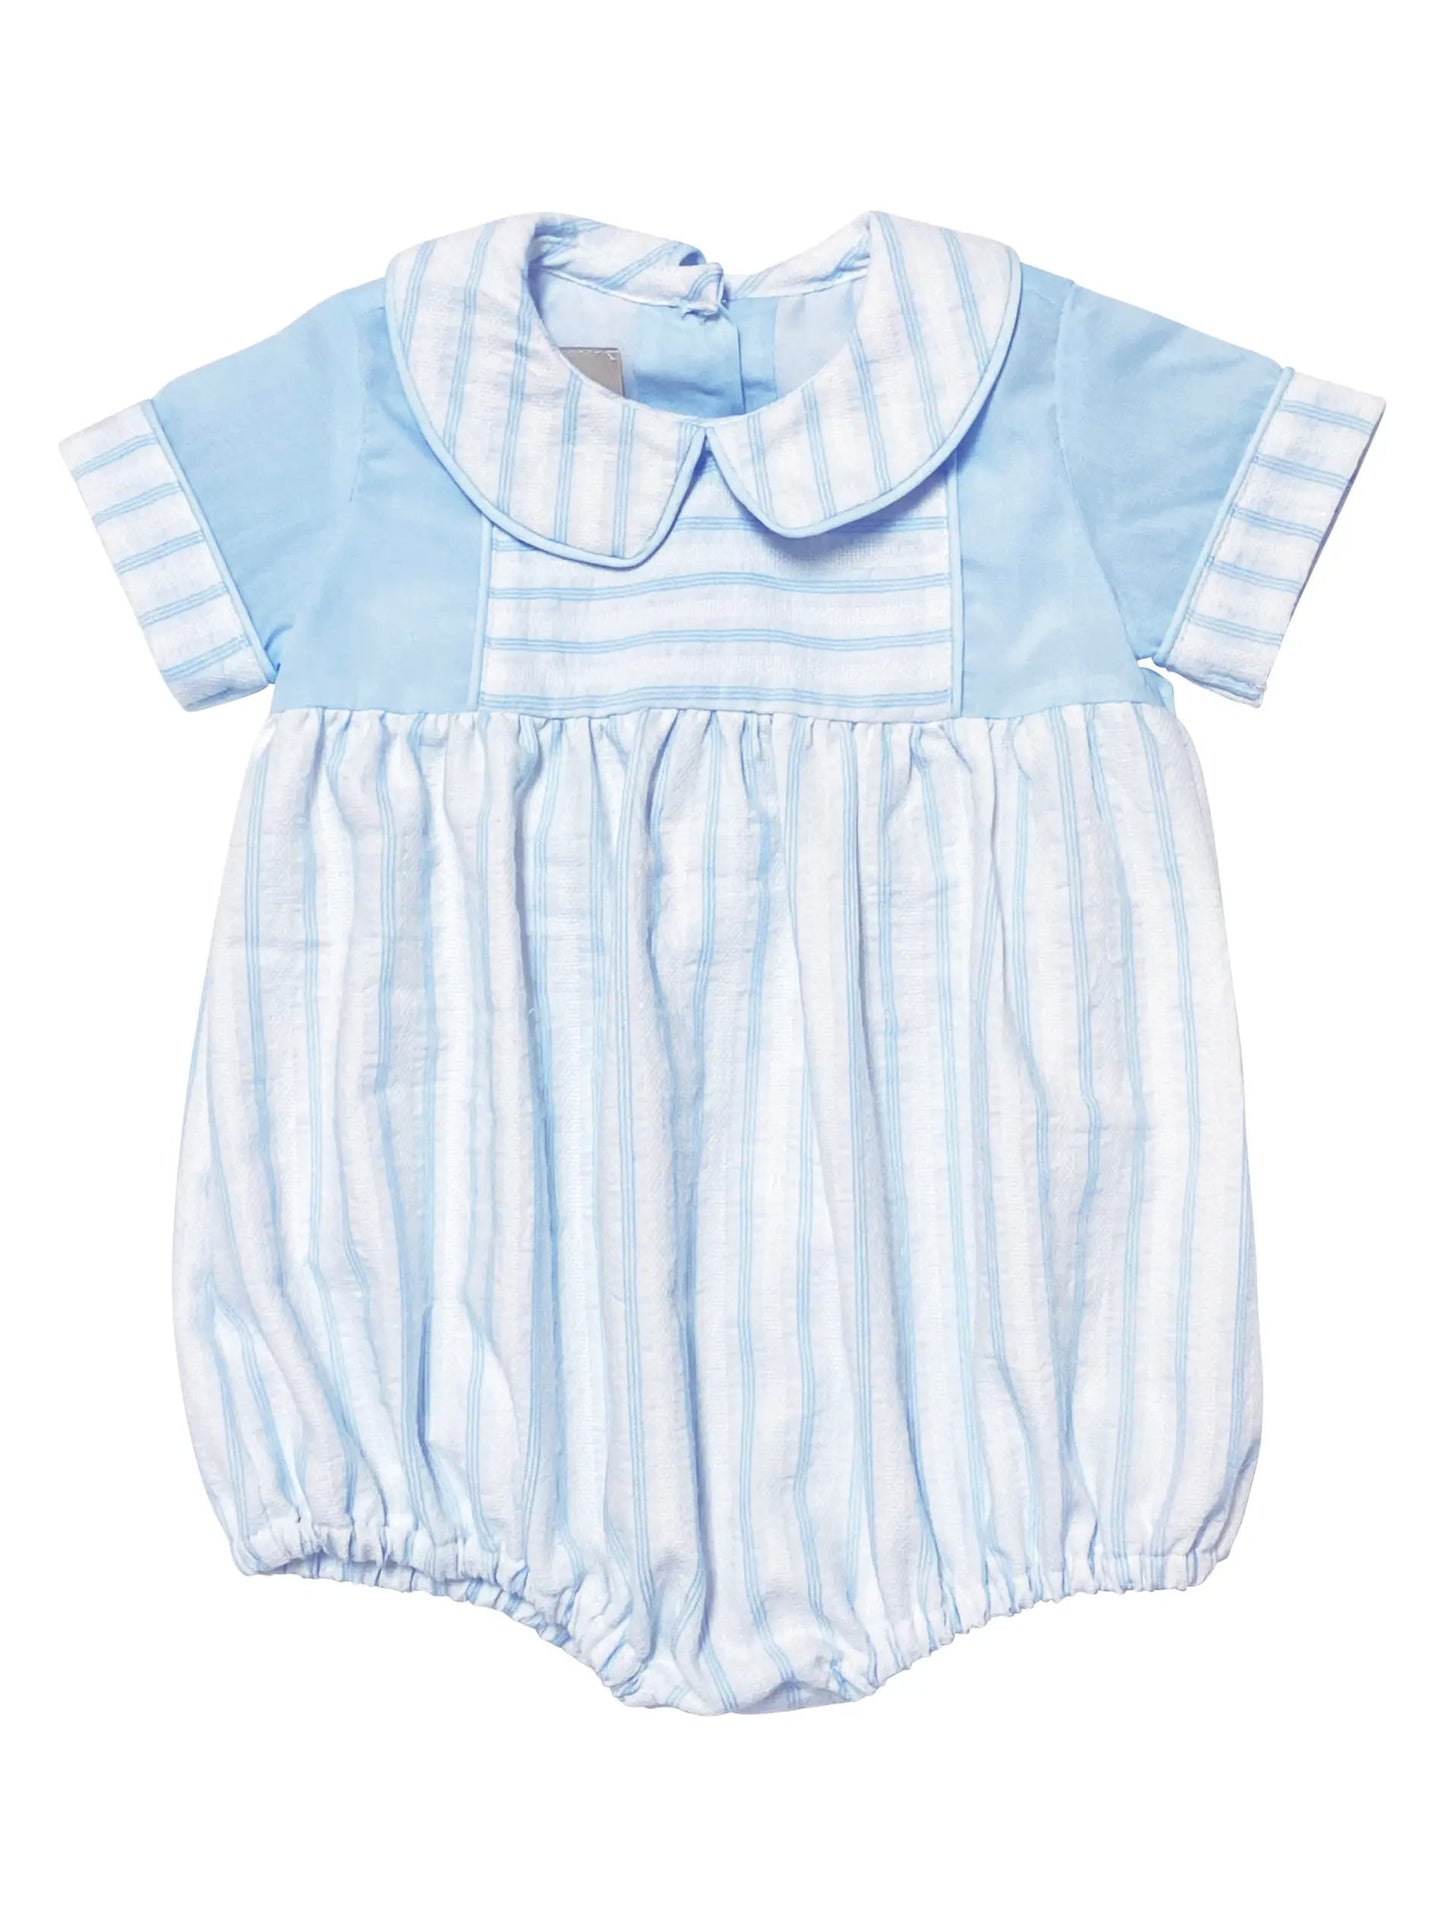 Baby Boy Blue Striped Romper - Blissfully Lavender BoutiqueMarco and Lizzy